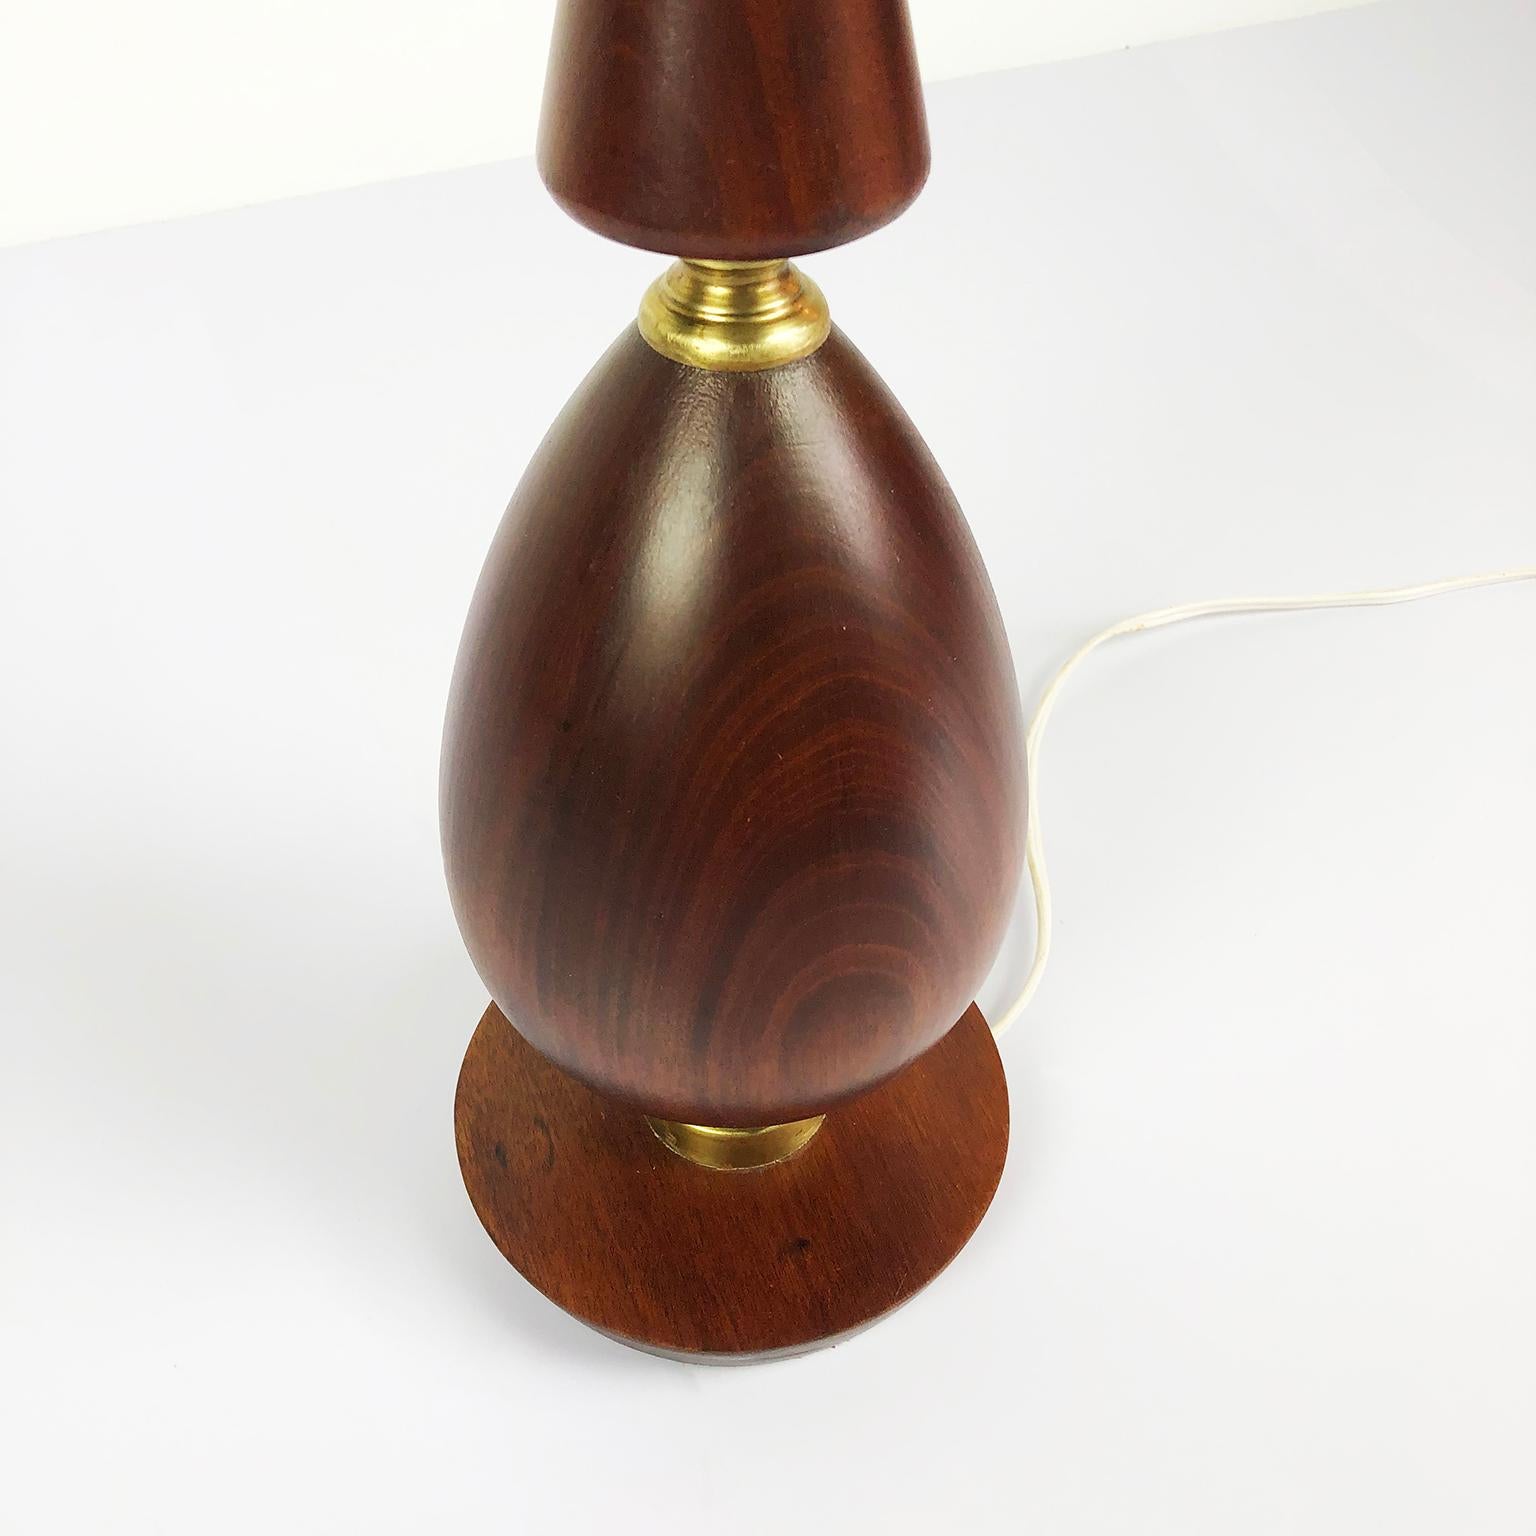 We offer this amazing a pair of midcentury Mexican modern table lamps in the style of Arturo Pani both are constructed with solid mahogany and brass accents, the lamps have been restored and rewired, circa 1950,. No shades included.